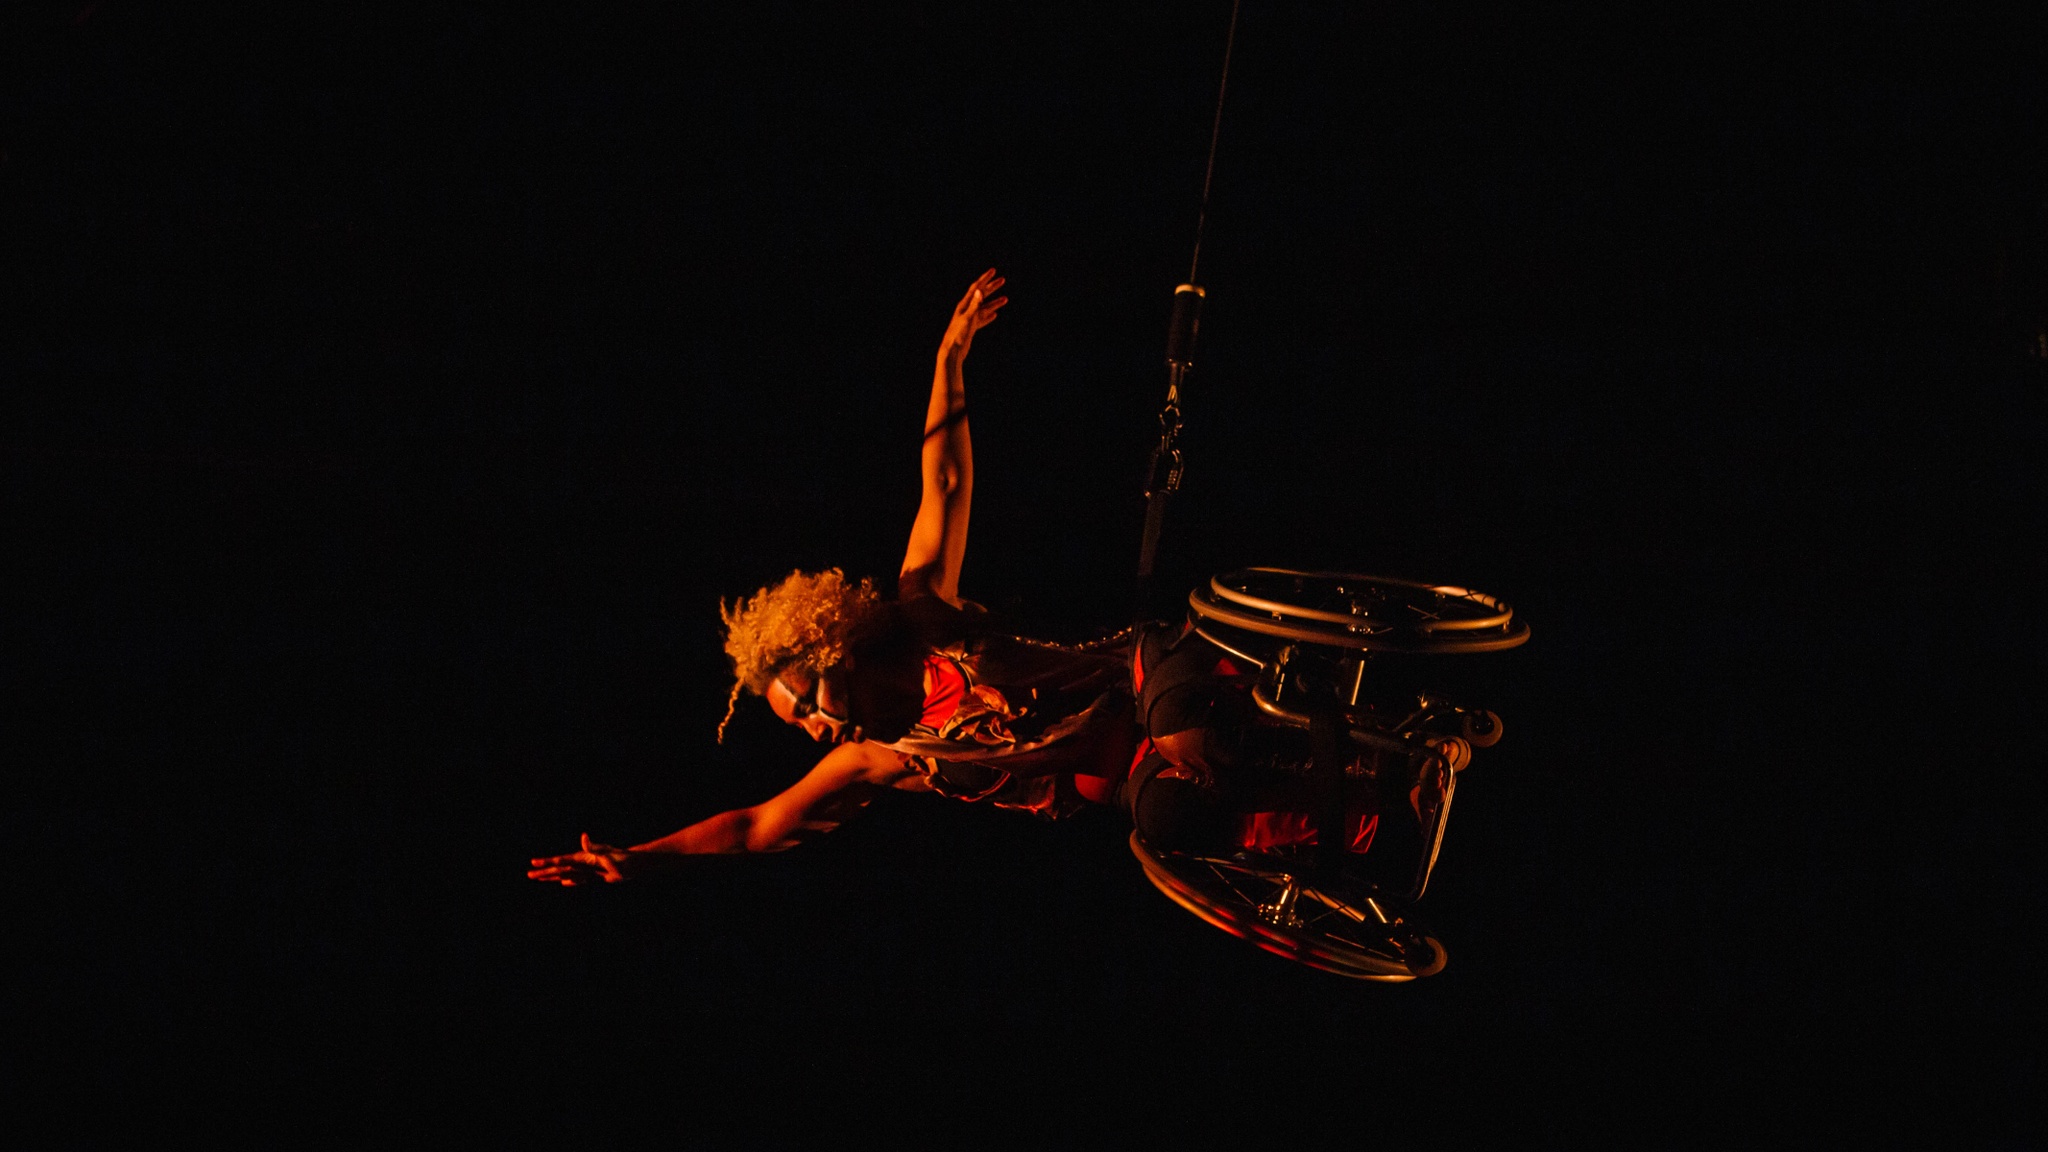 Alice Sheppard flies in her wheelchair, body parallel to the stage as she reaches one arm high and extends the other to the side. She dances in a glowing red shadow. She is a multiracial Black woman with coffee colored skin and short curly hair; she wears a red and gold bodysuit, black and white lines adorn her face.